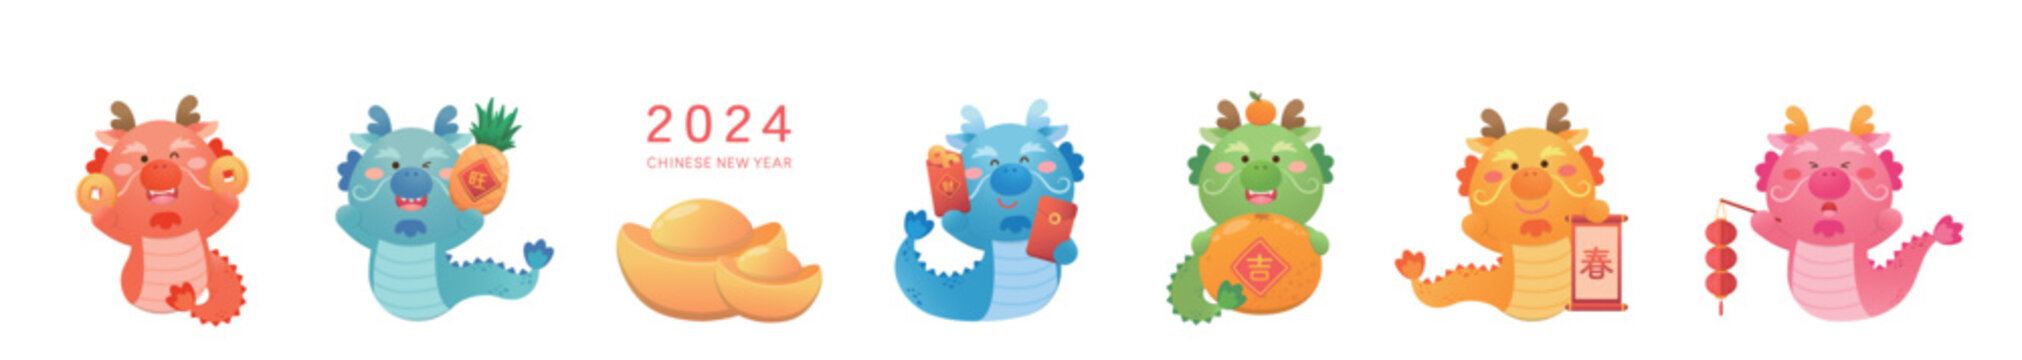 6 cute Chinese dragon characters or mascots or cartoon characters, playful and cute, vector elements for Chinese New Year, translation: spring